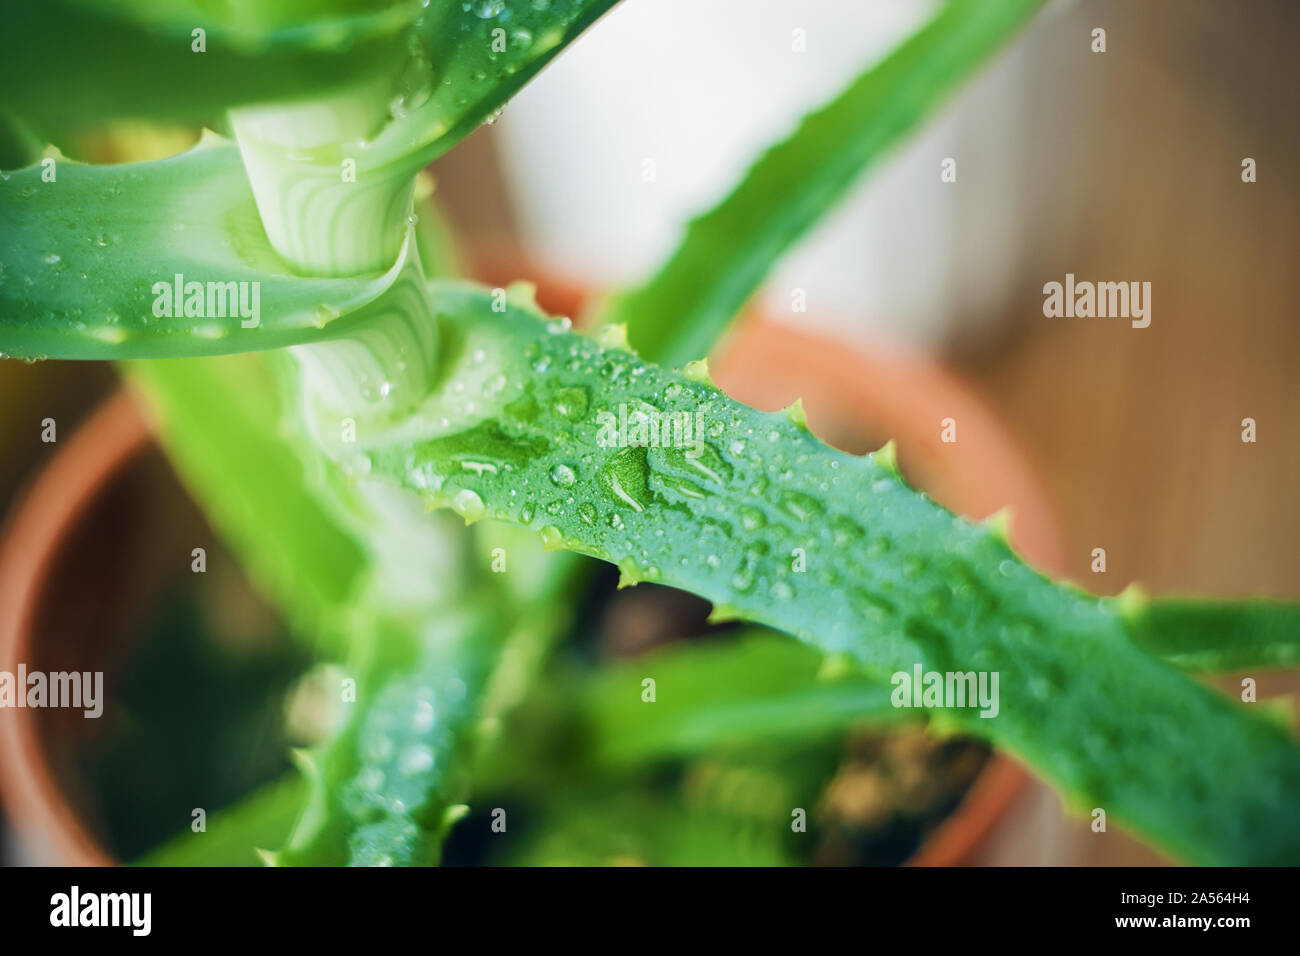 The prickly leaf of the green young aloe Vera that grows from the pot is covered with dew drops that shimmer in the light. Stock Photo